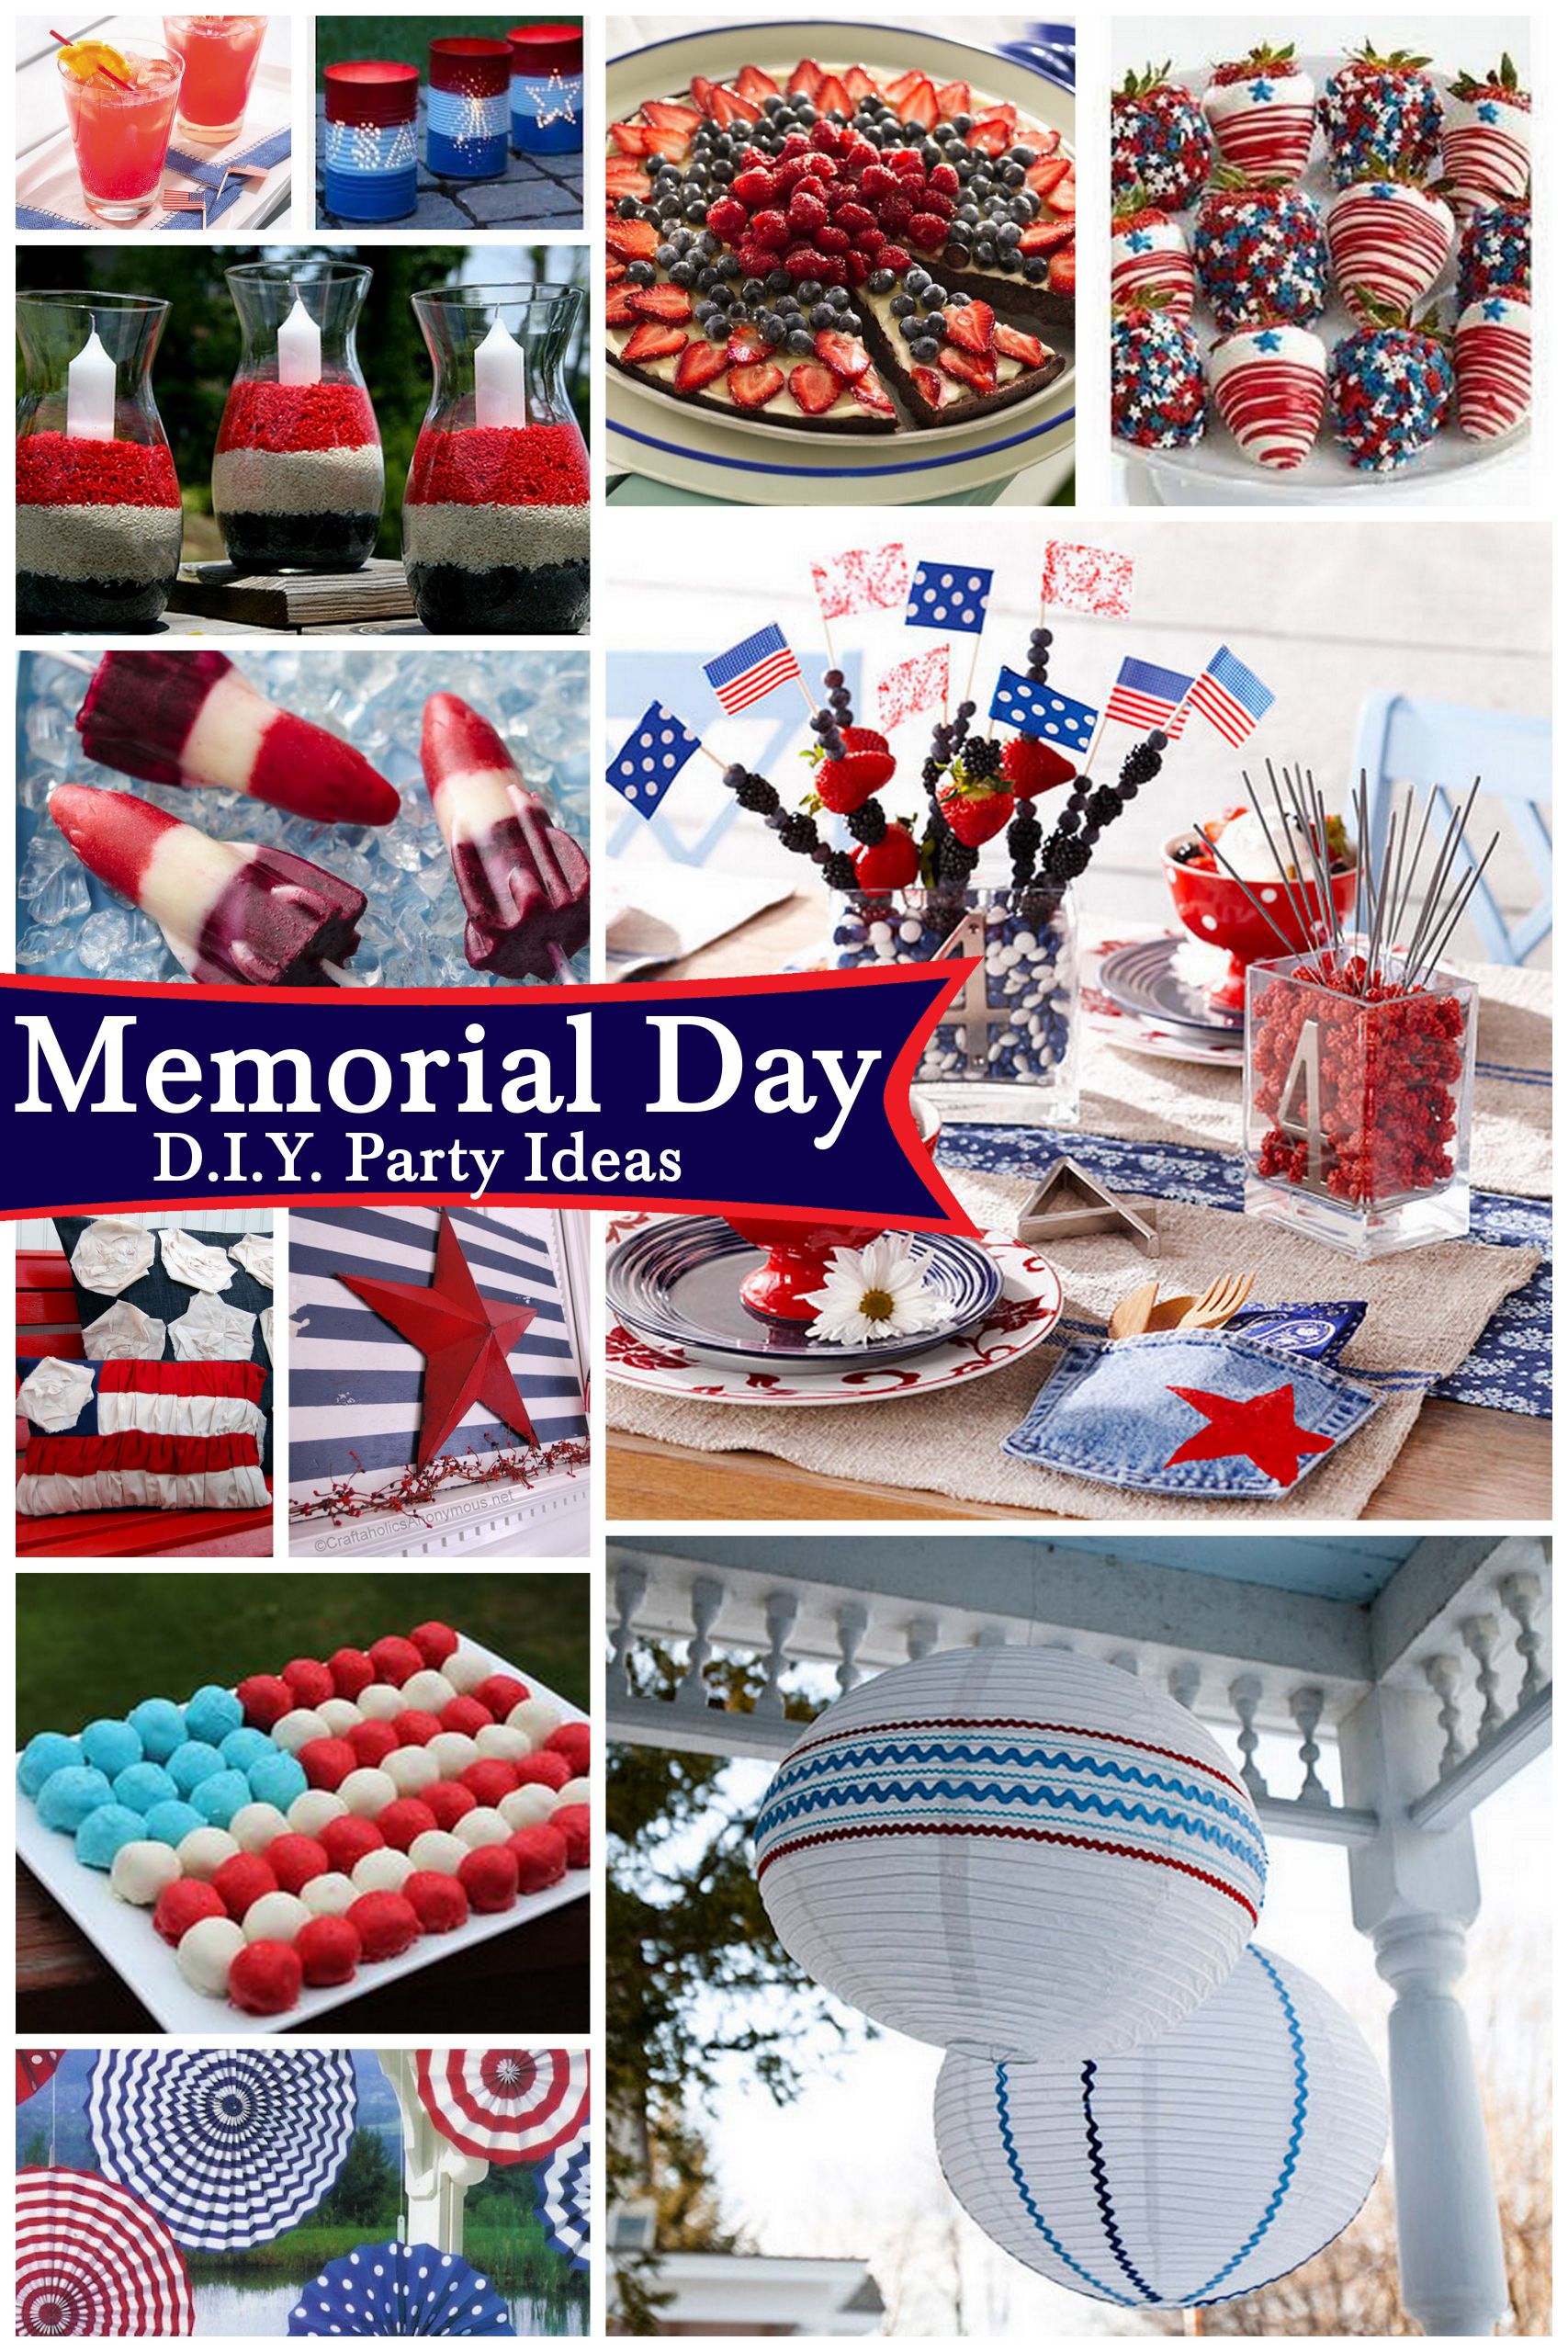 Memorial Day Gifts Ideas
 Memorial Day D I Y Party Ideas